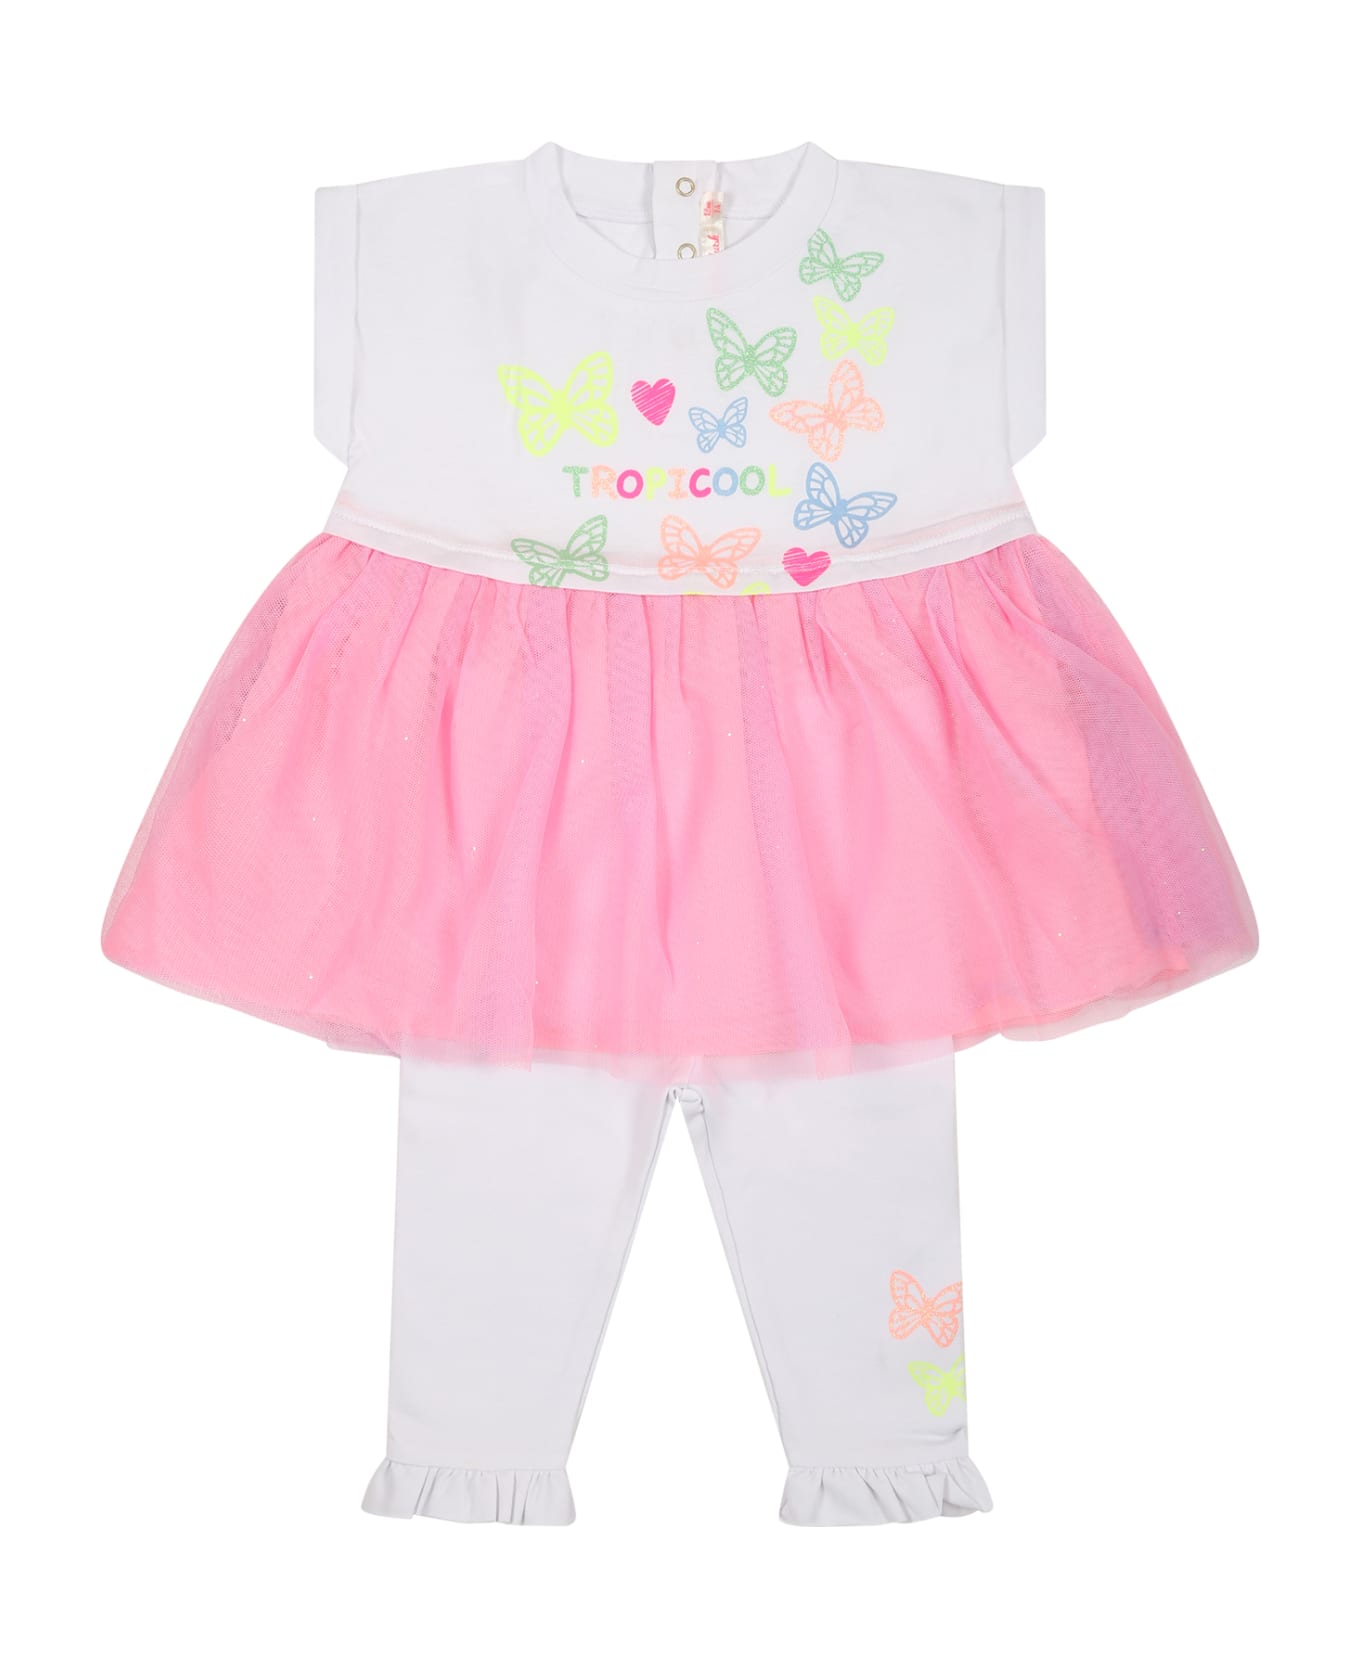 Billieblush White Suit For Baby Girl With Butterflies And Hearts - White